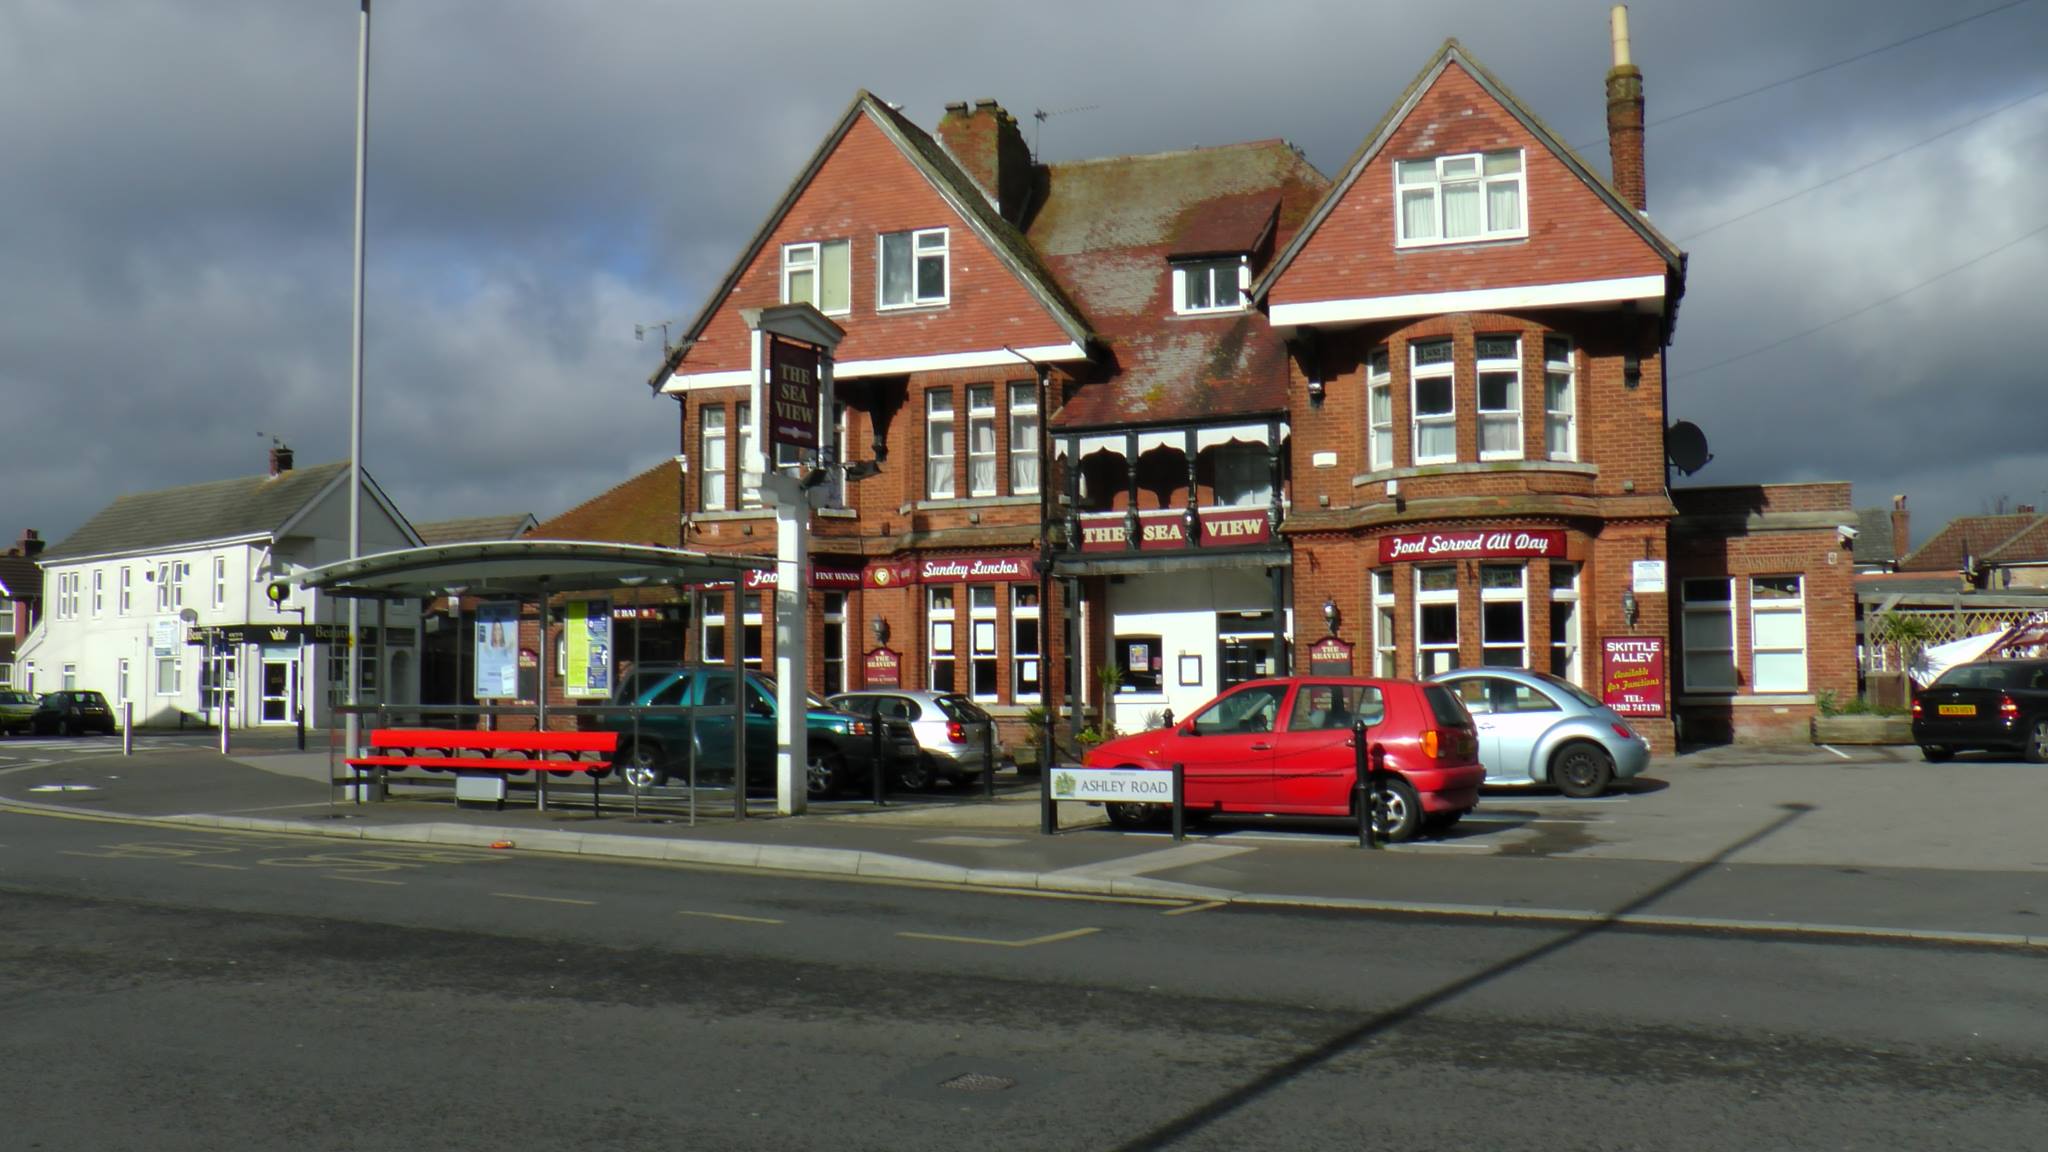 The Seaview pub in Parkstone, which is set to become a Co-op supermarket.